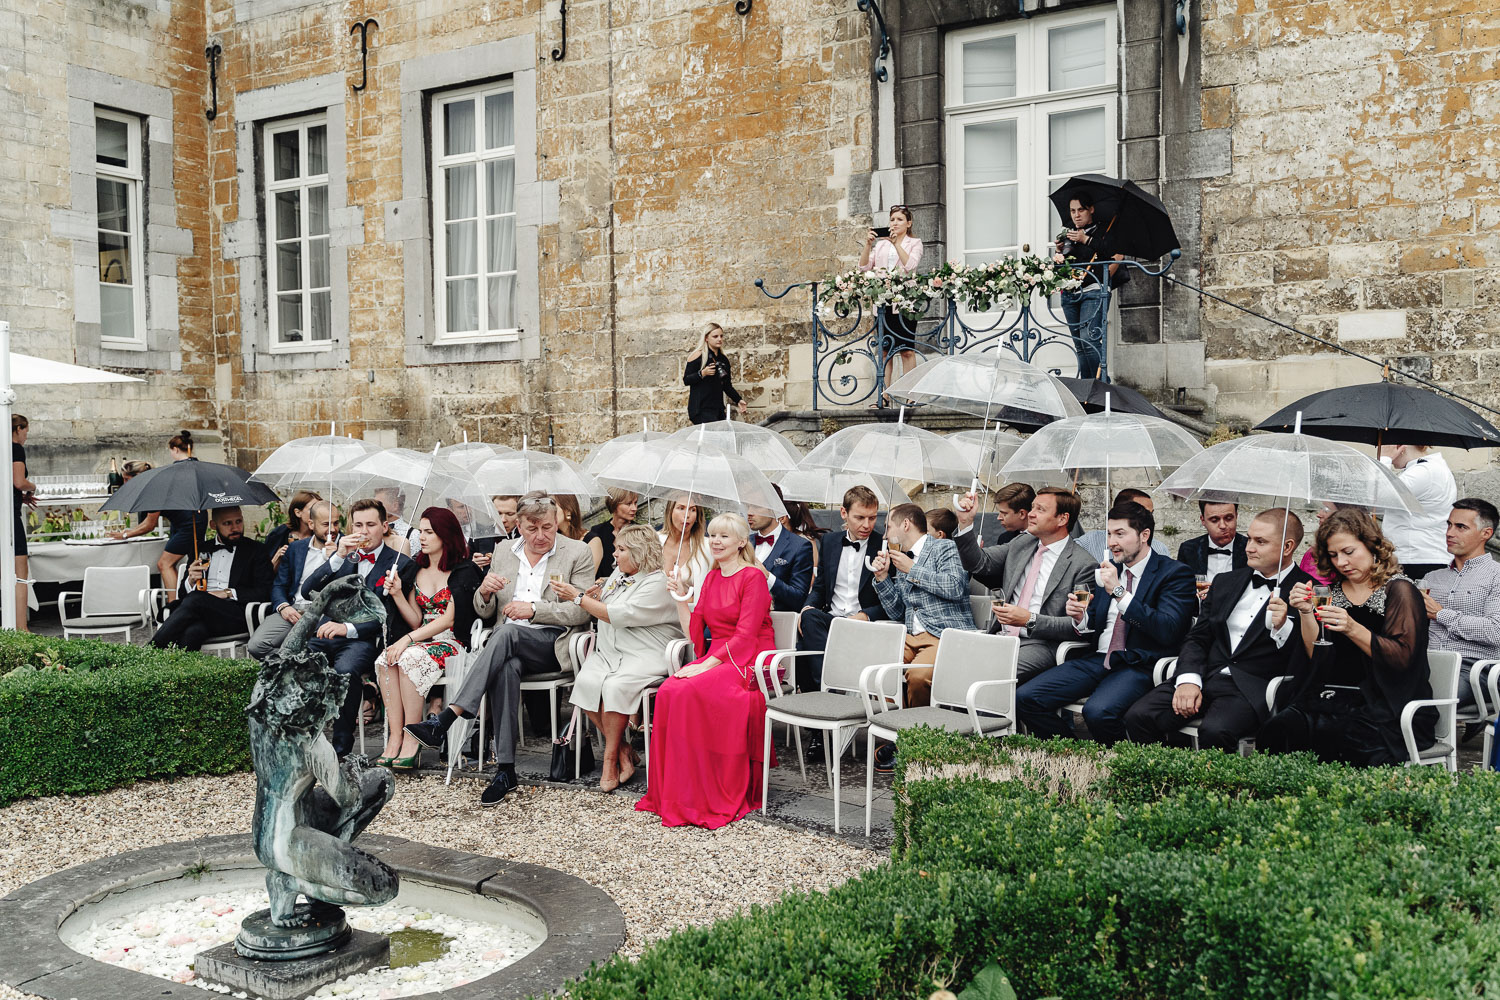 Guests seating at wedding ceremony with wedding transparent and black umbrellas in a terrace of the castle in Limburg.